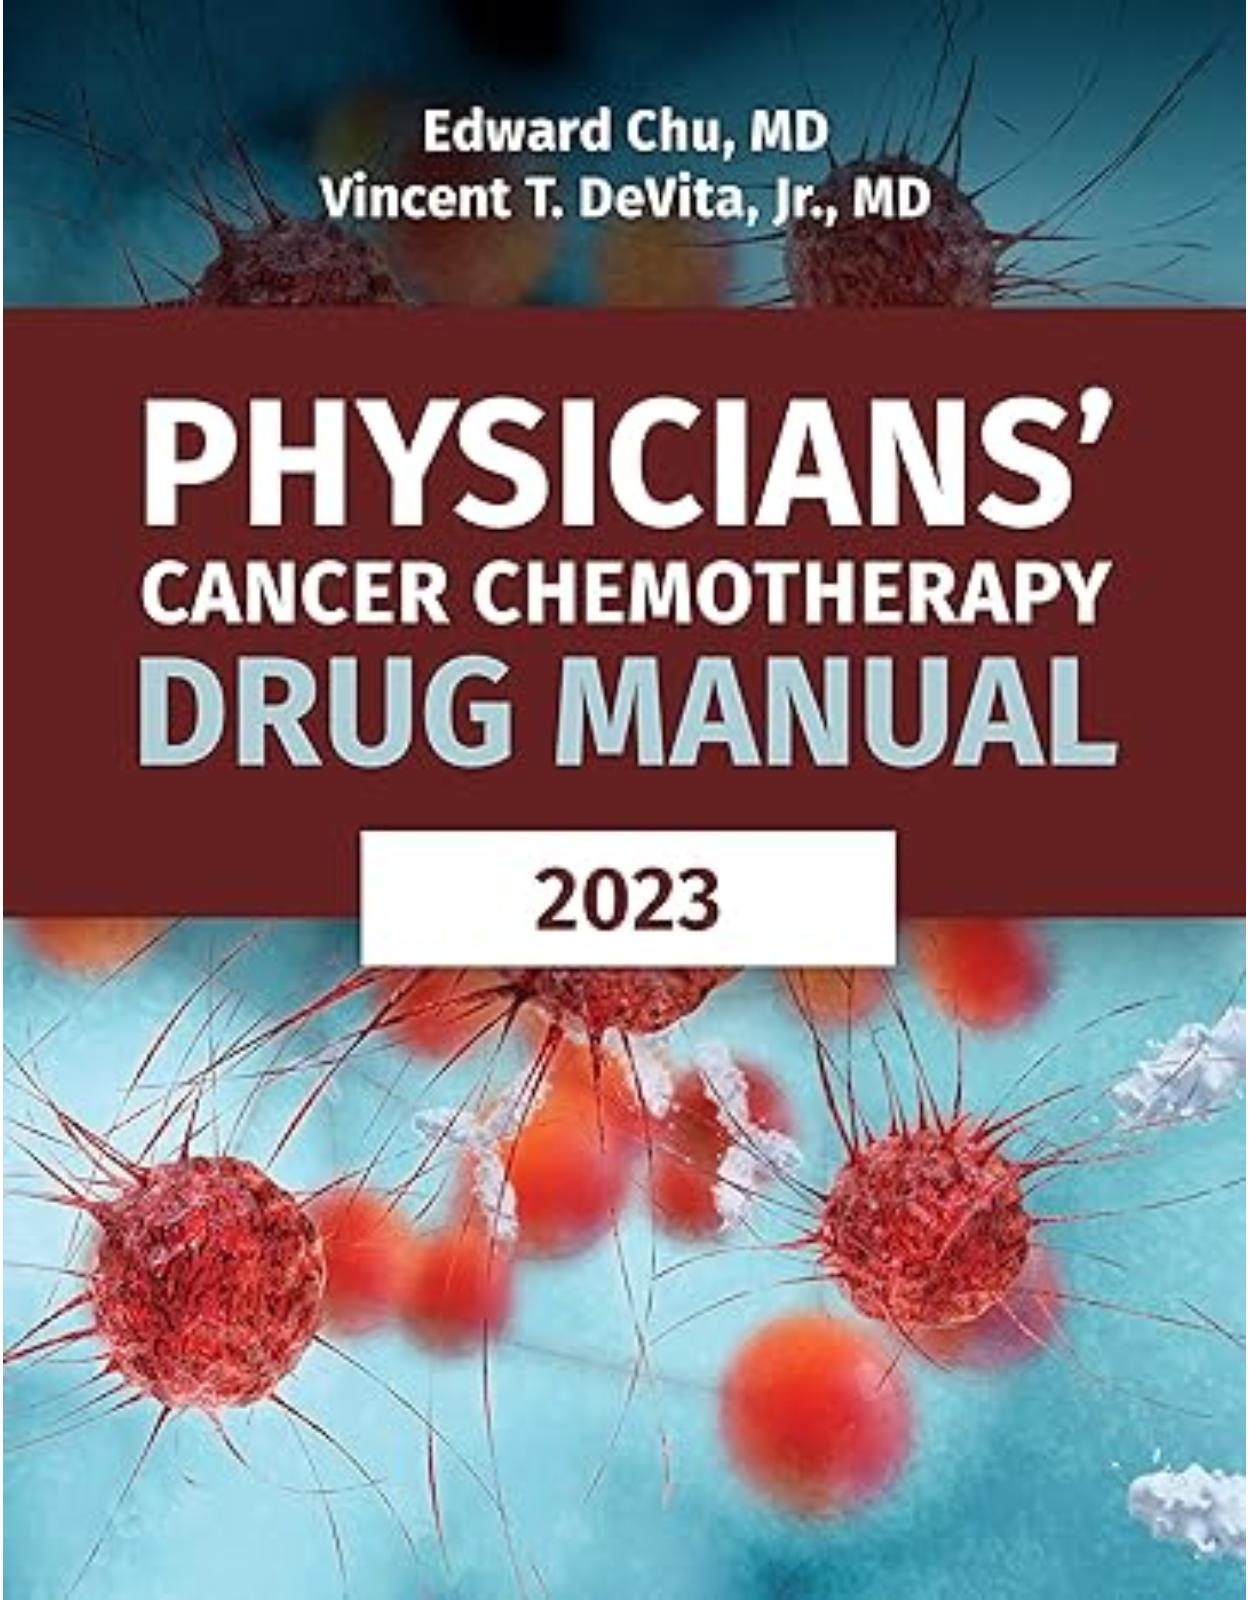 Physicians’ Cancer Chemotherapy Drug Manual 2023